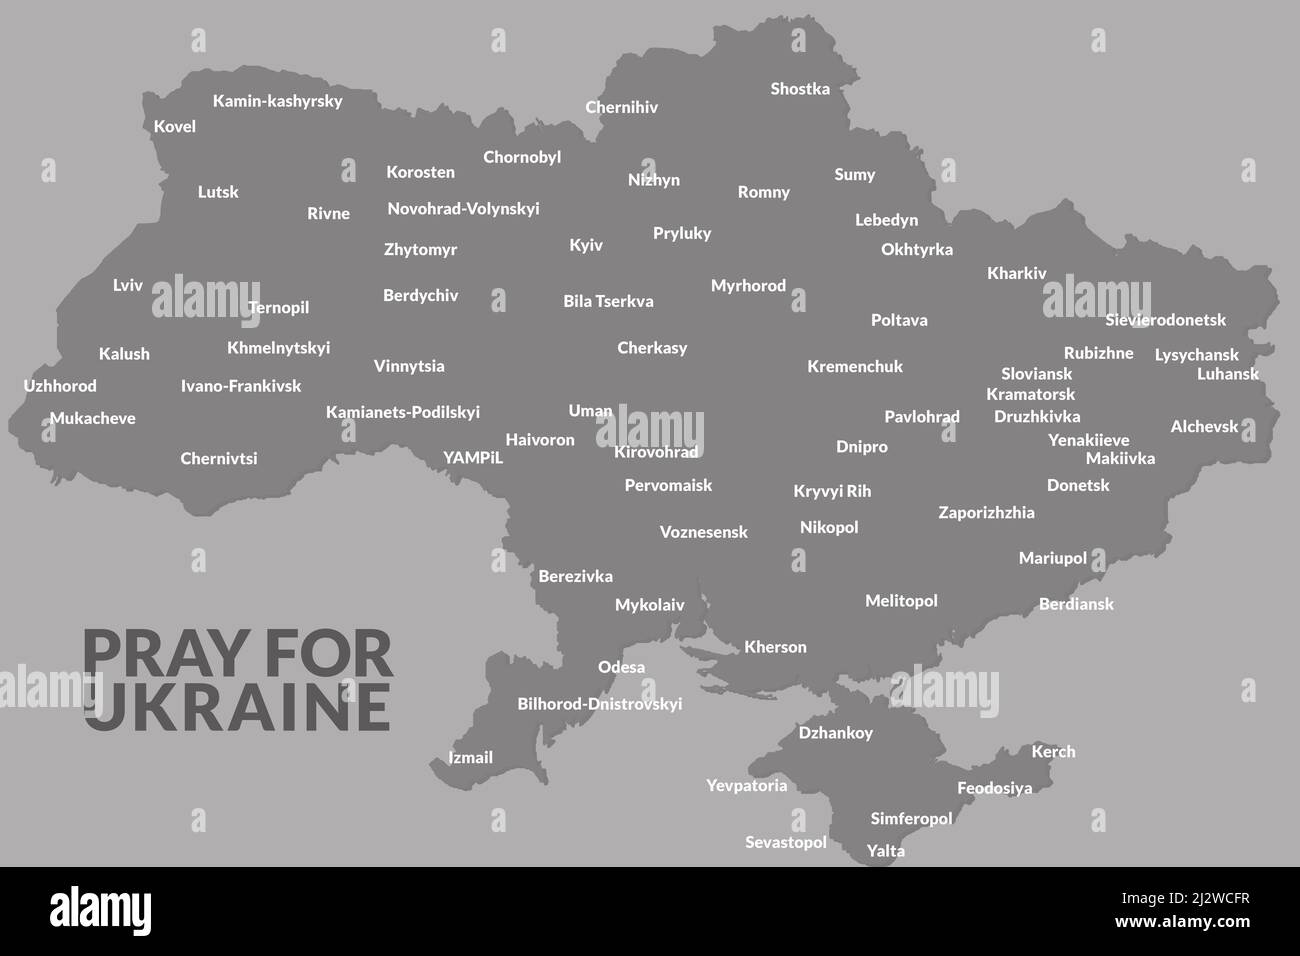 Slogan PRAY FOR UKRAINE and the map of Ukraine with names of cities on the grey colors Stock Photo